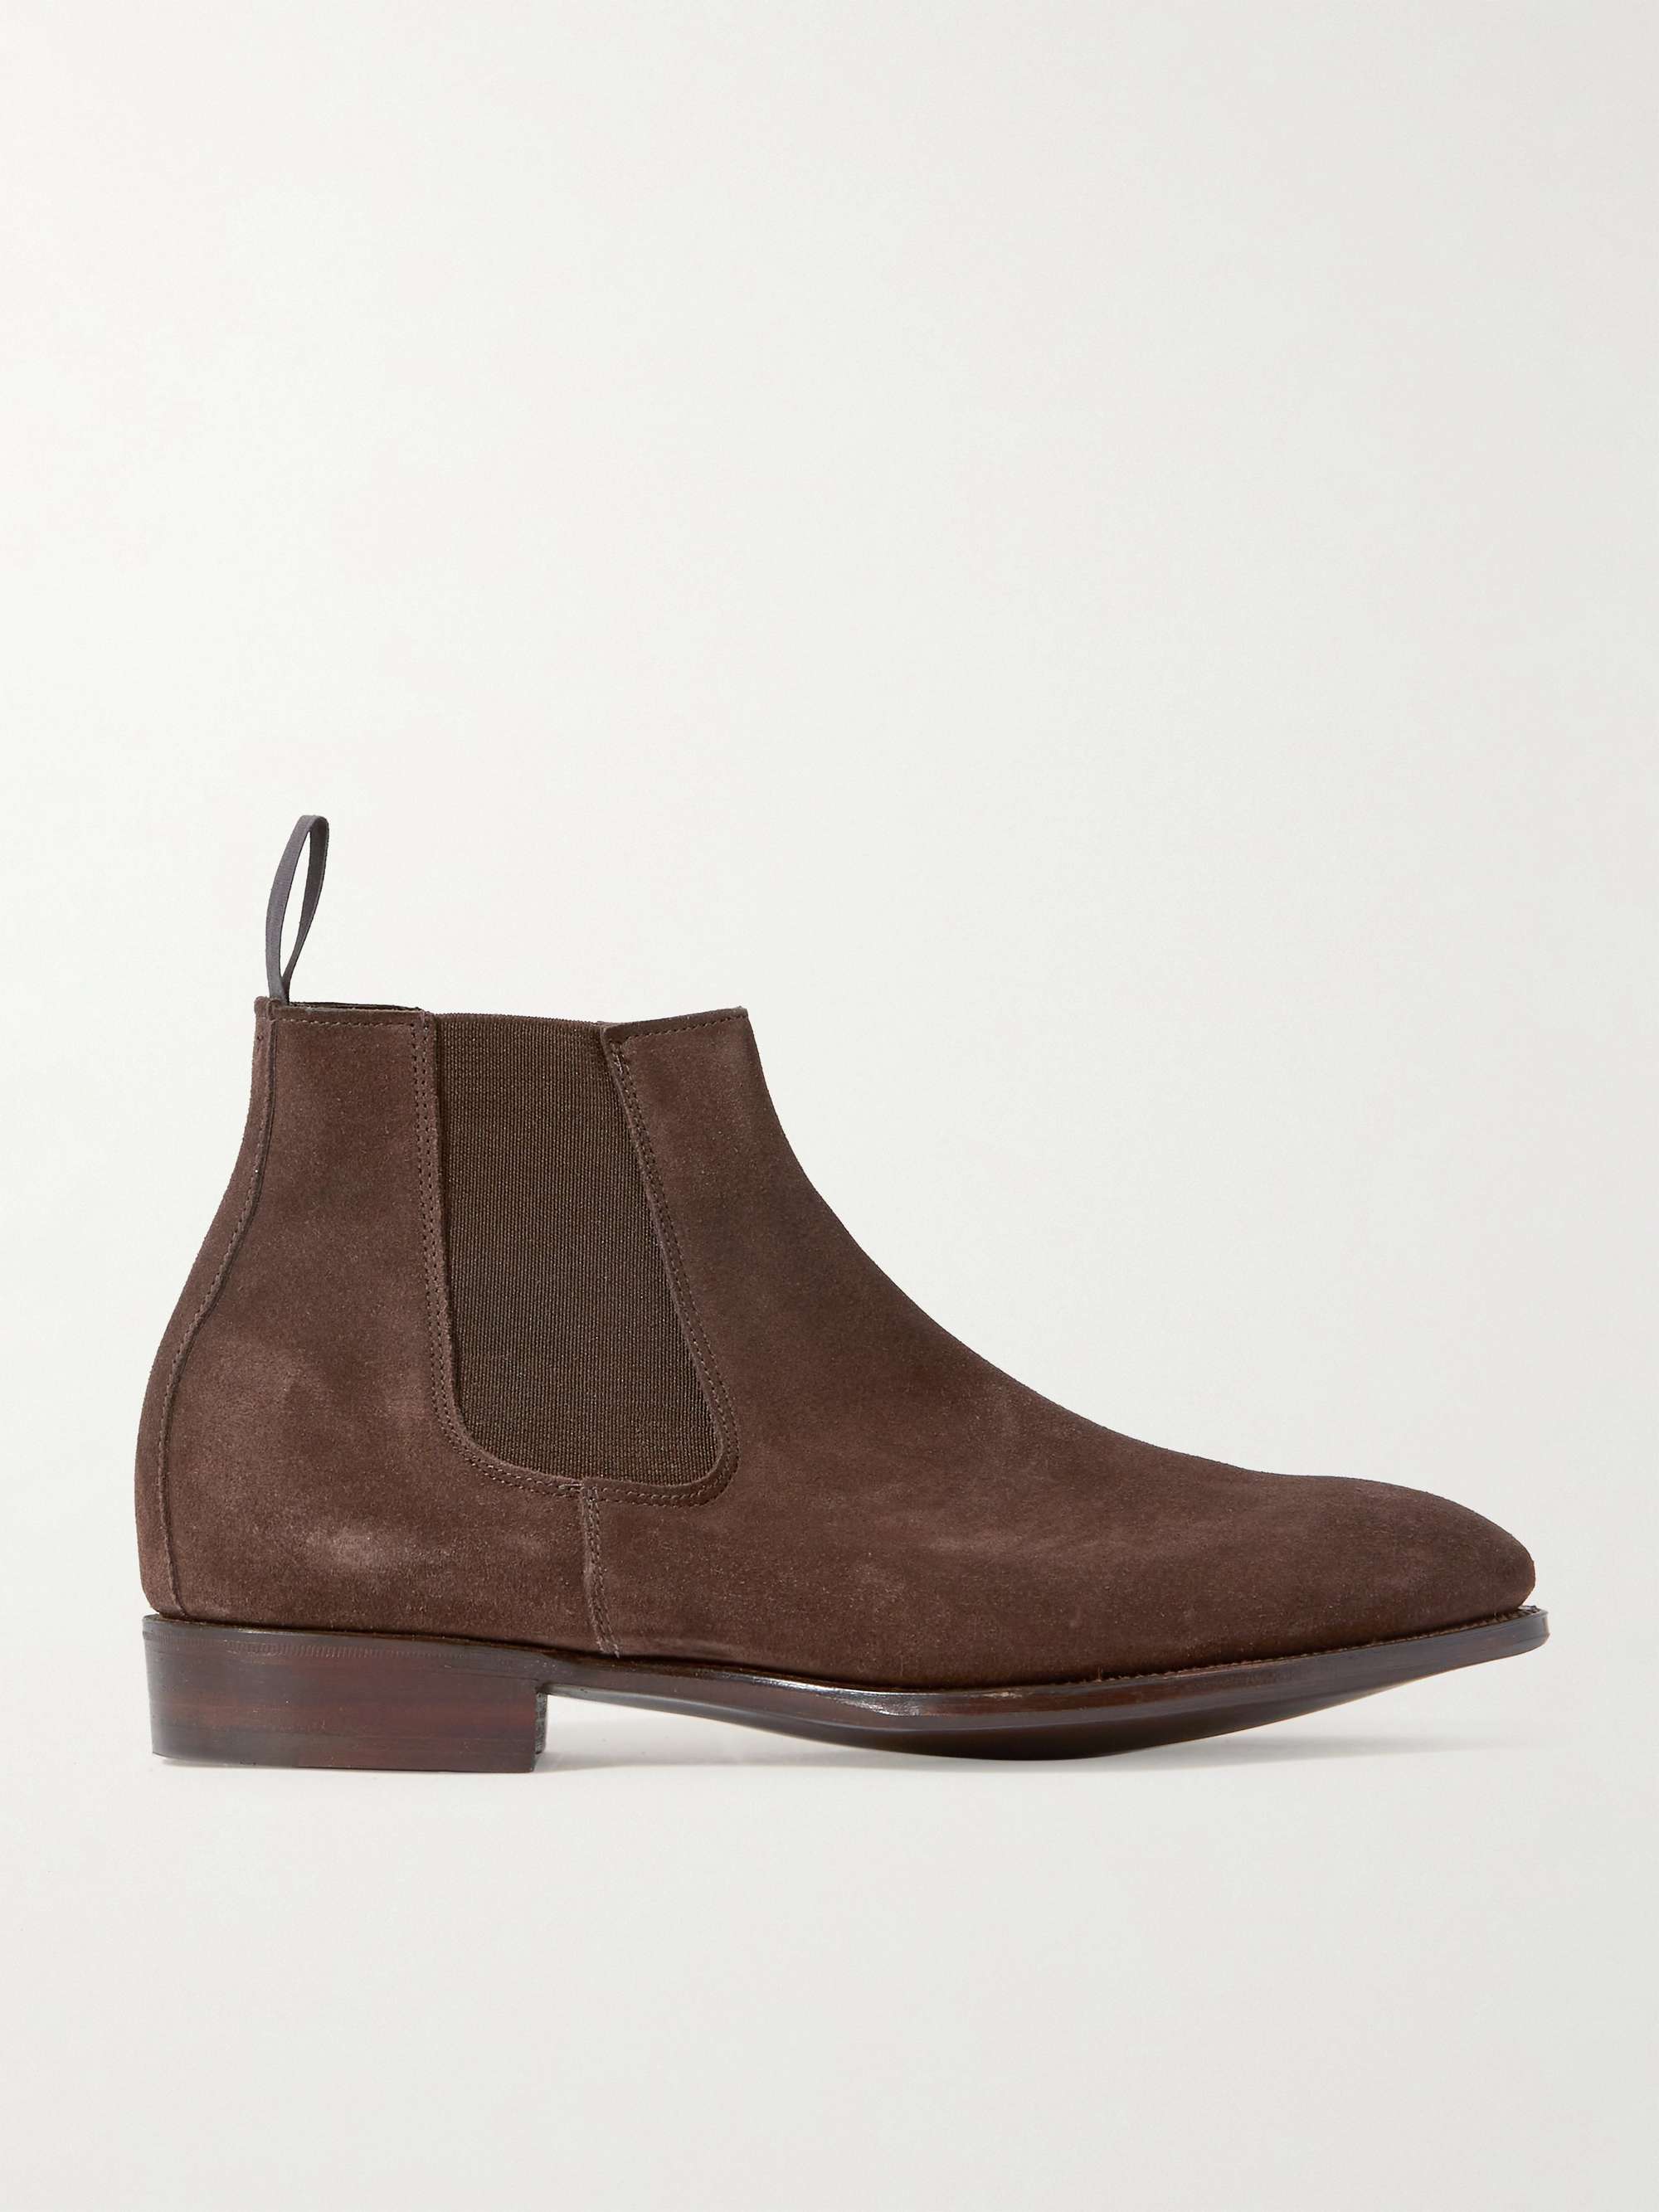 KINGSMAN + George Cleverley Jason Leather Chelsea Boots